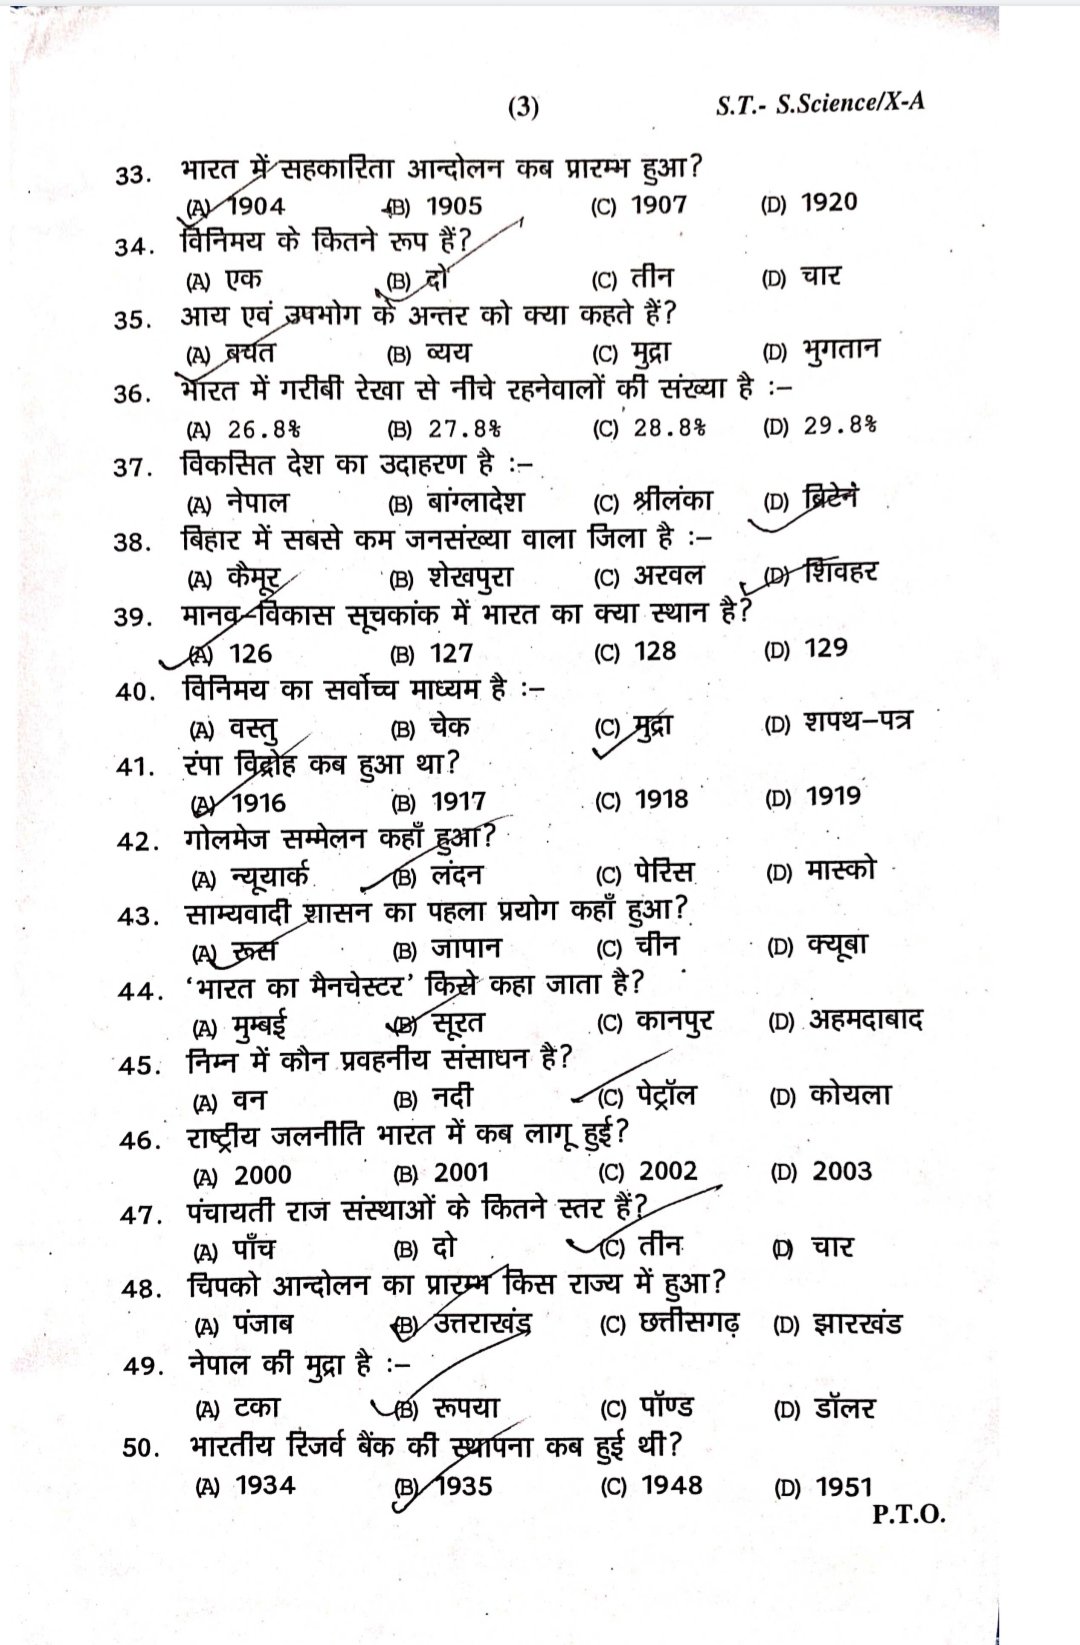 Class 10th Social Science Second Terminal Exam Questions Paper 2022